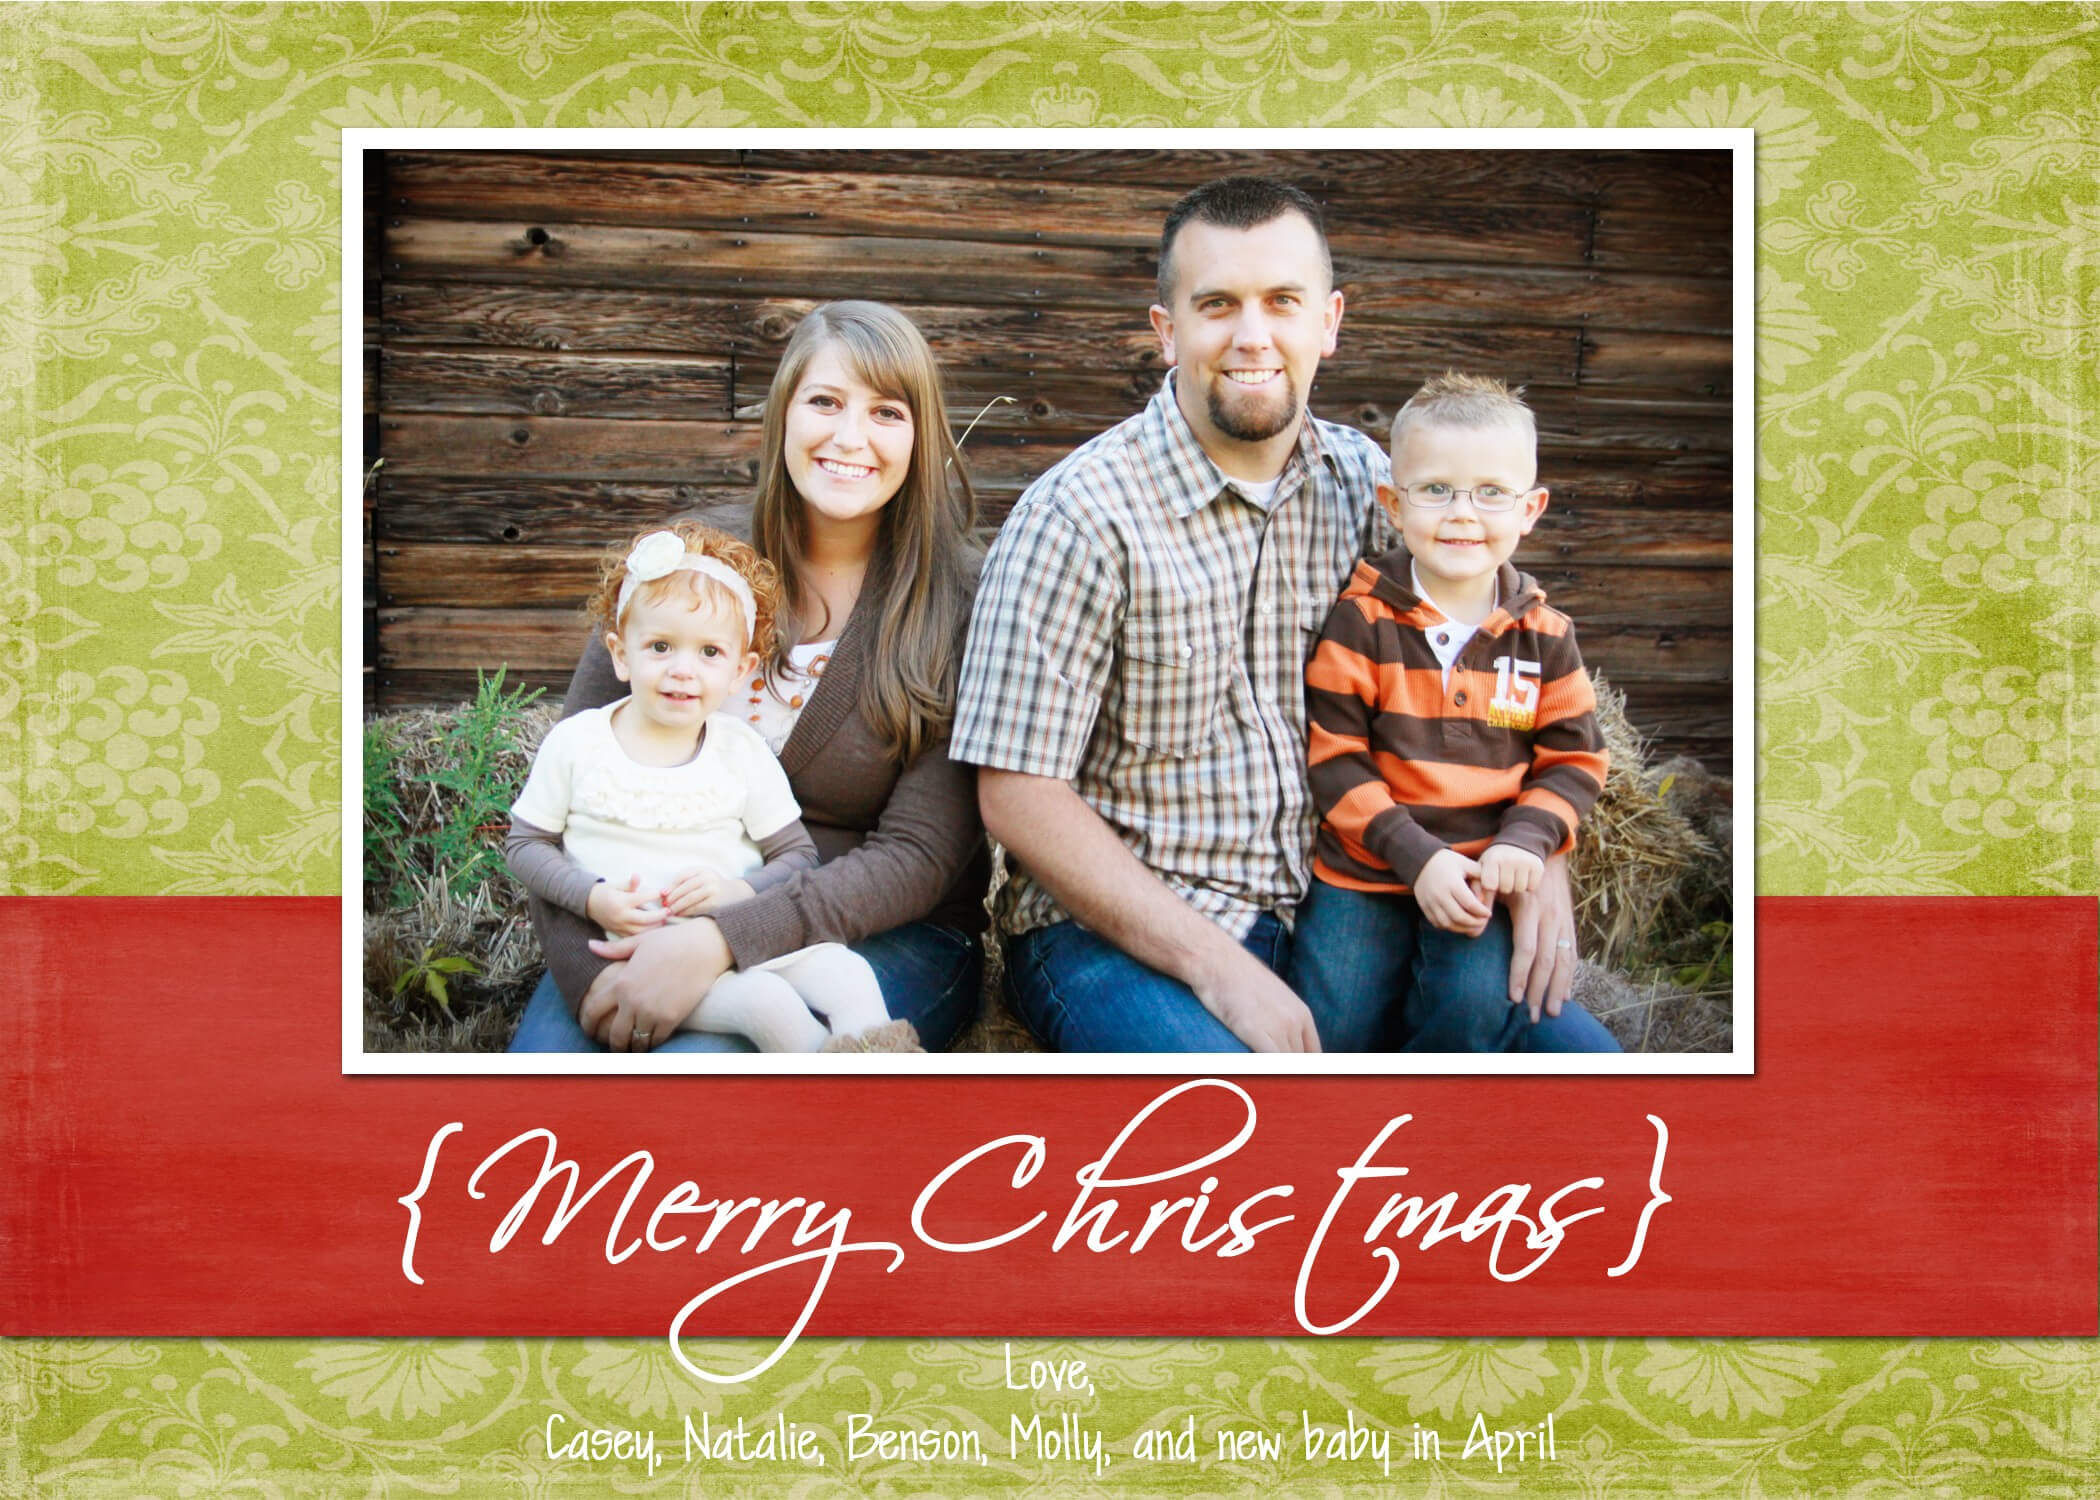 Christmas Card Templates For Photoshop Kamenitzafanclub For Free Photoshop Christmas Card Templates For Photographers